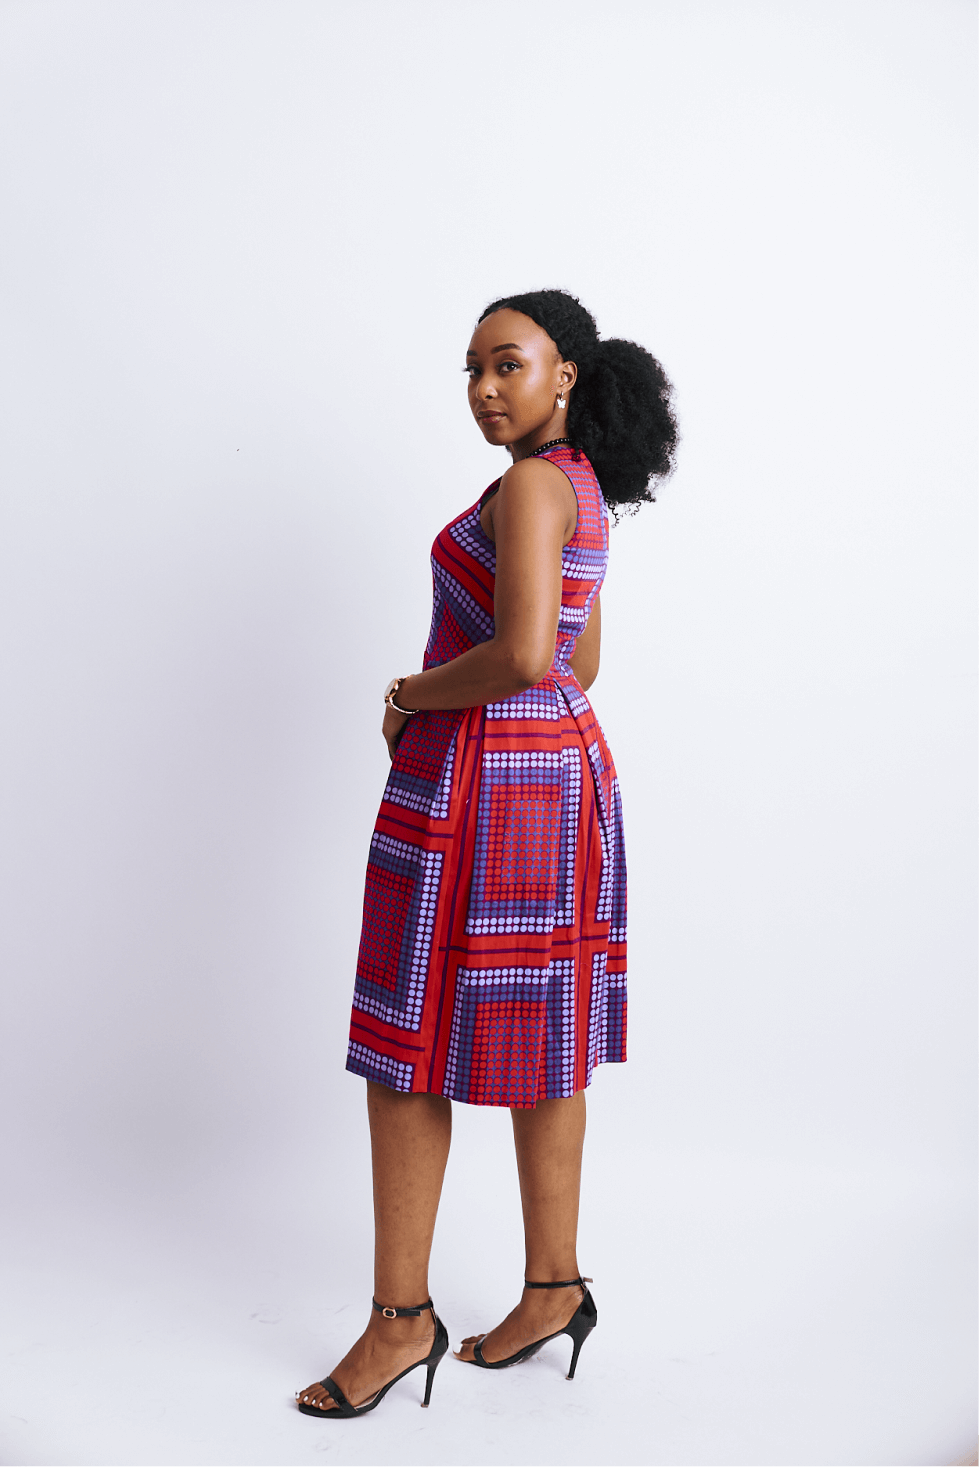 Shop Polka Cotton Skater by The Fashion Frenzy on Arrai. Discover stylish, affordable clothing, jewelry, handbags and unique handmade pieces from top Kenyan & African fashion brands prioritising sustainability and quality craftsmanship.